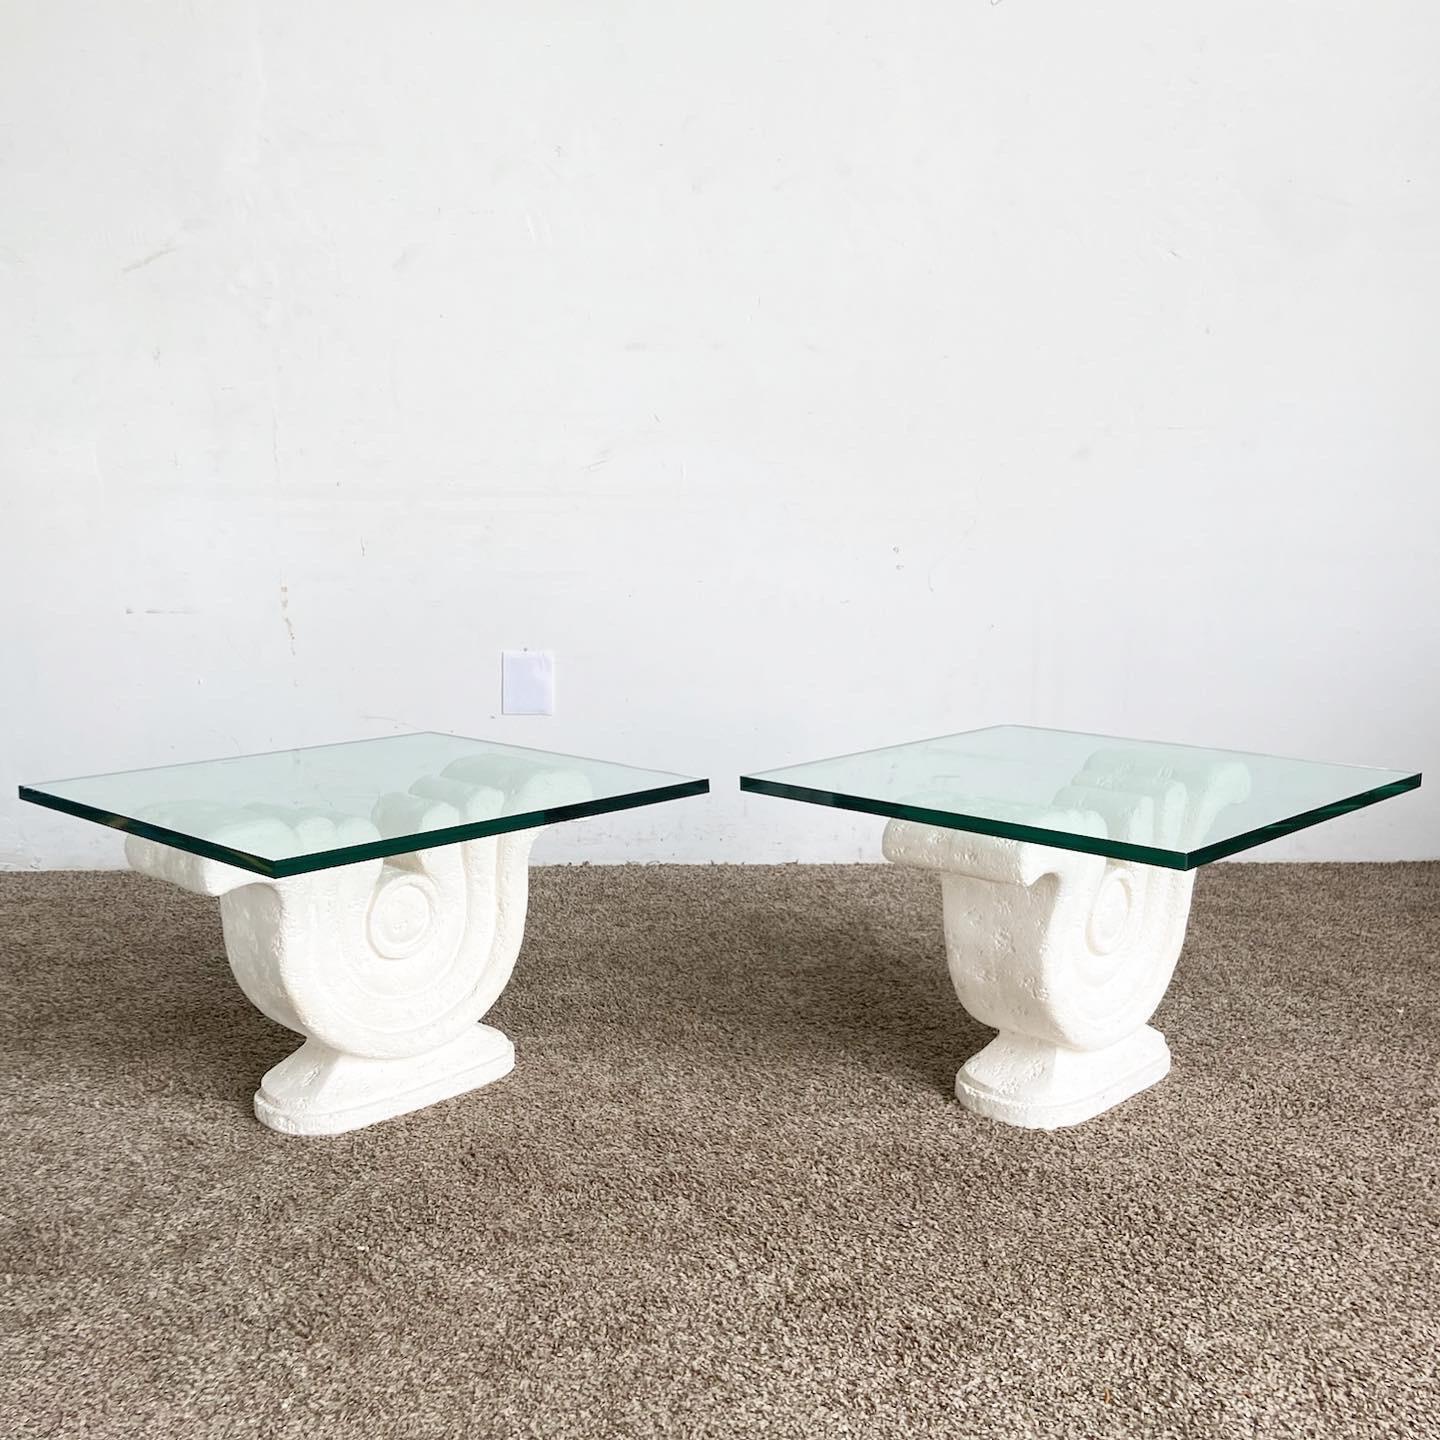 Add a touch of artistic flair with our Postmodern Sculpted Plaster Glass Top Side Tables, featuring a unique sculpted base and transparent glass tops.

Unique sculpted plaster base captures the essence of postmodern design.
Transparent glass tops